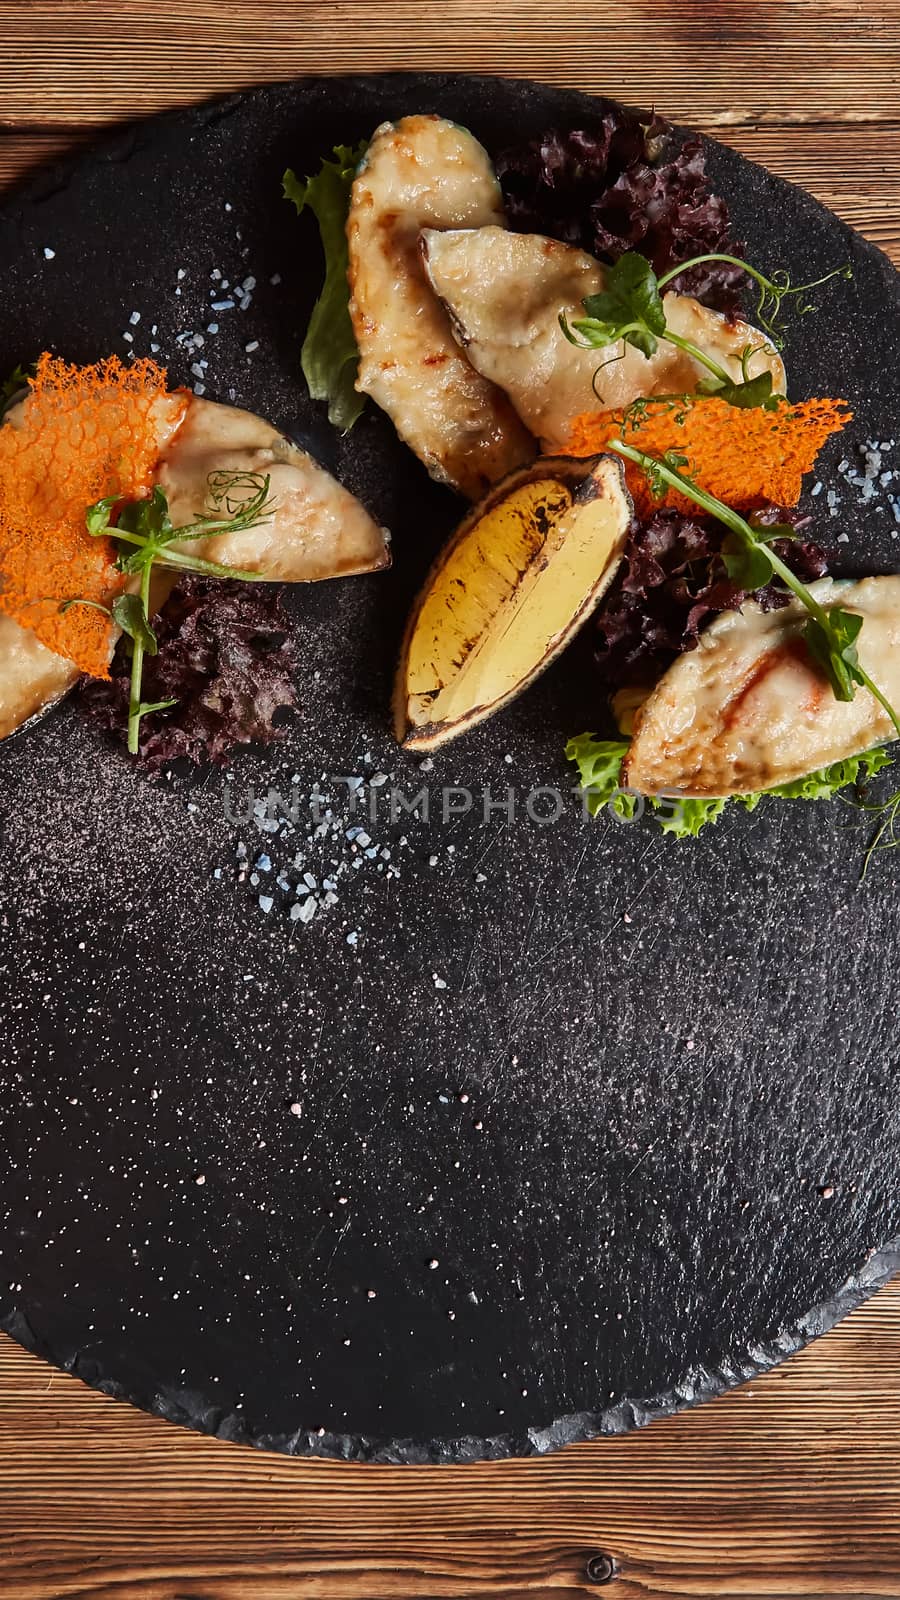 Seafood. Shellfish mussels. Baked mussels with cheese, cilantro and lemon in shells on slate stone board. Plate of mussels, cold white wine, lemon and cilantro on black stone background. Top view